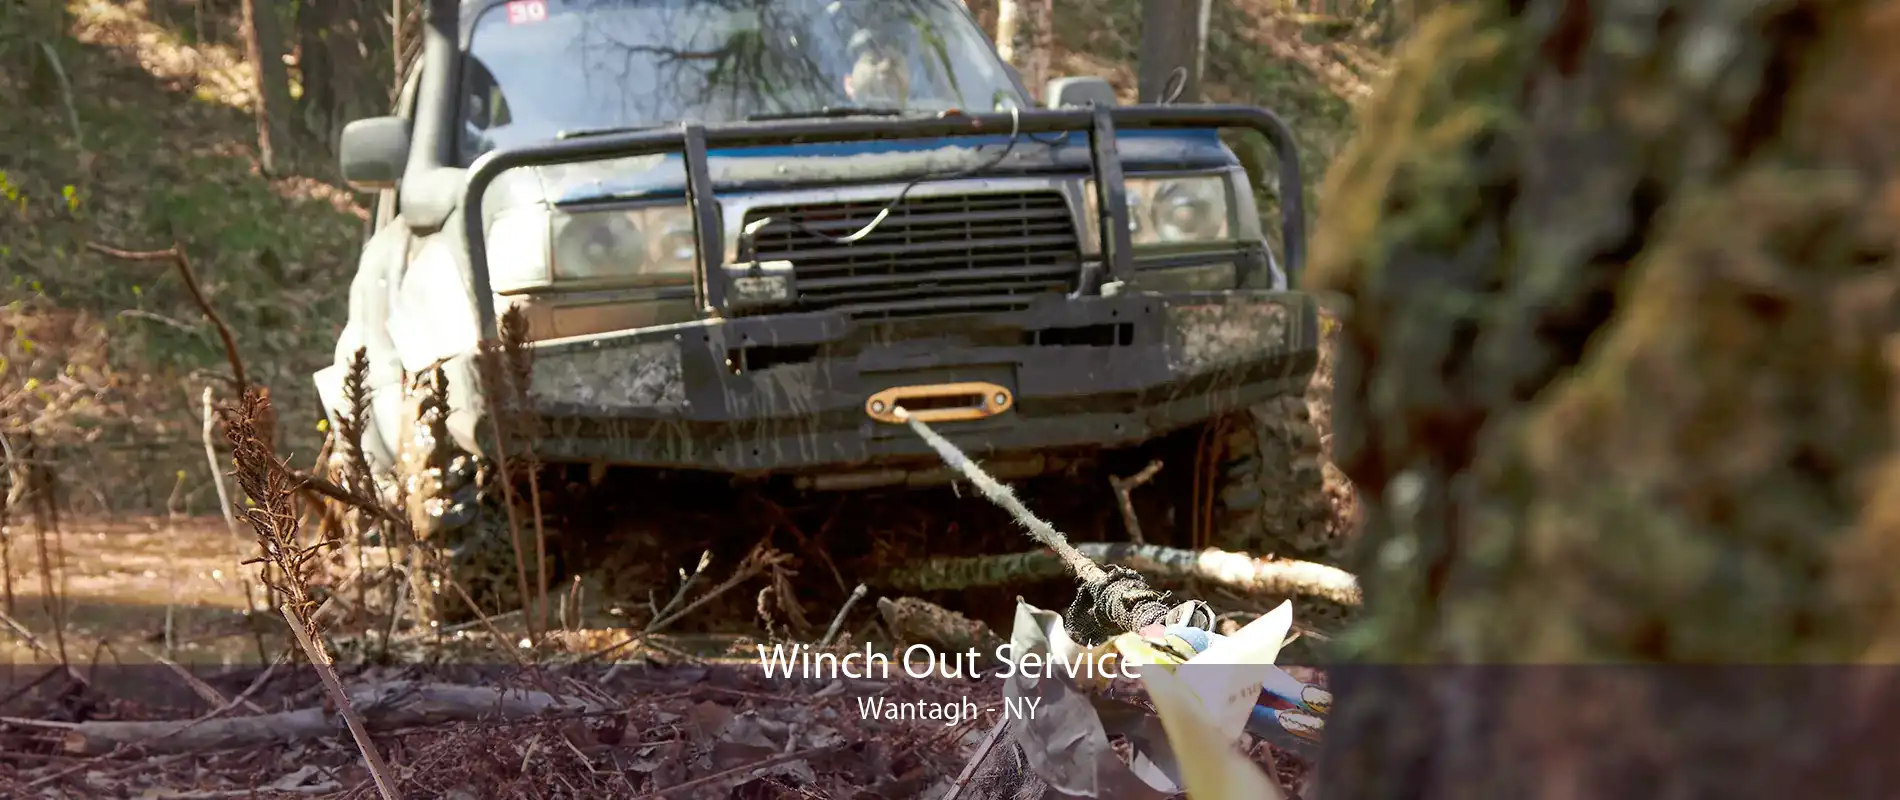 Winch Out Service Wantagh - NY